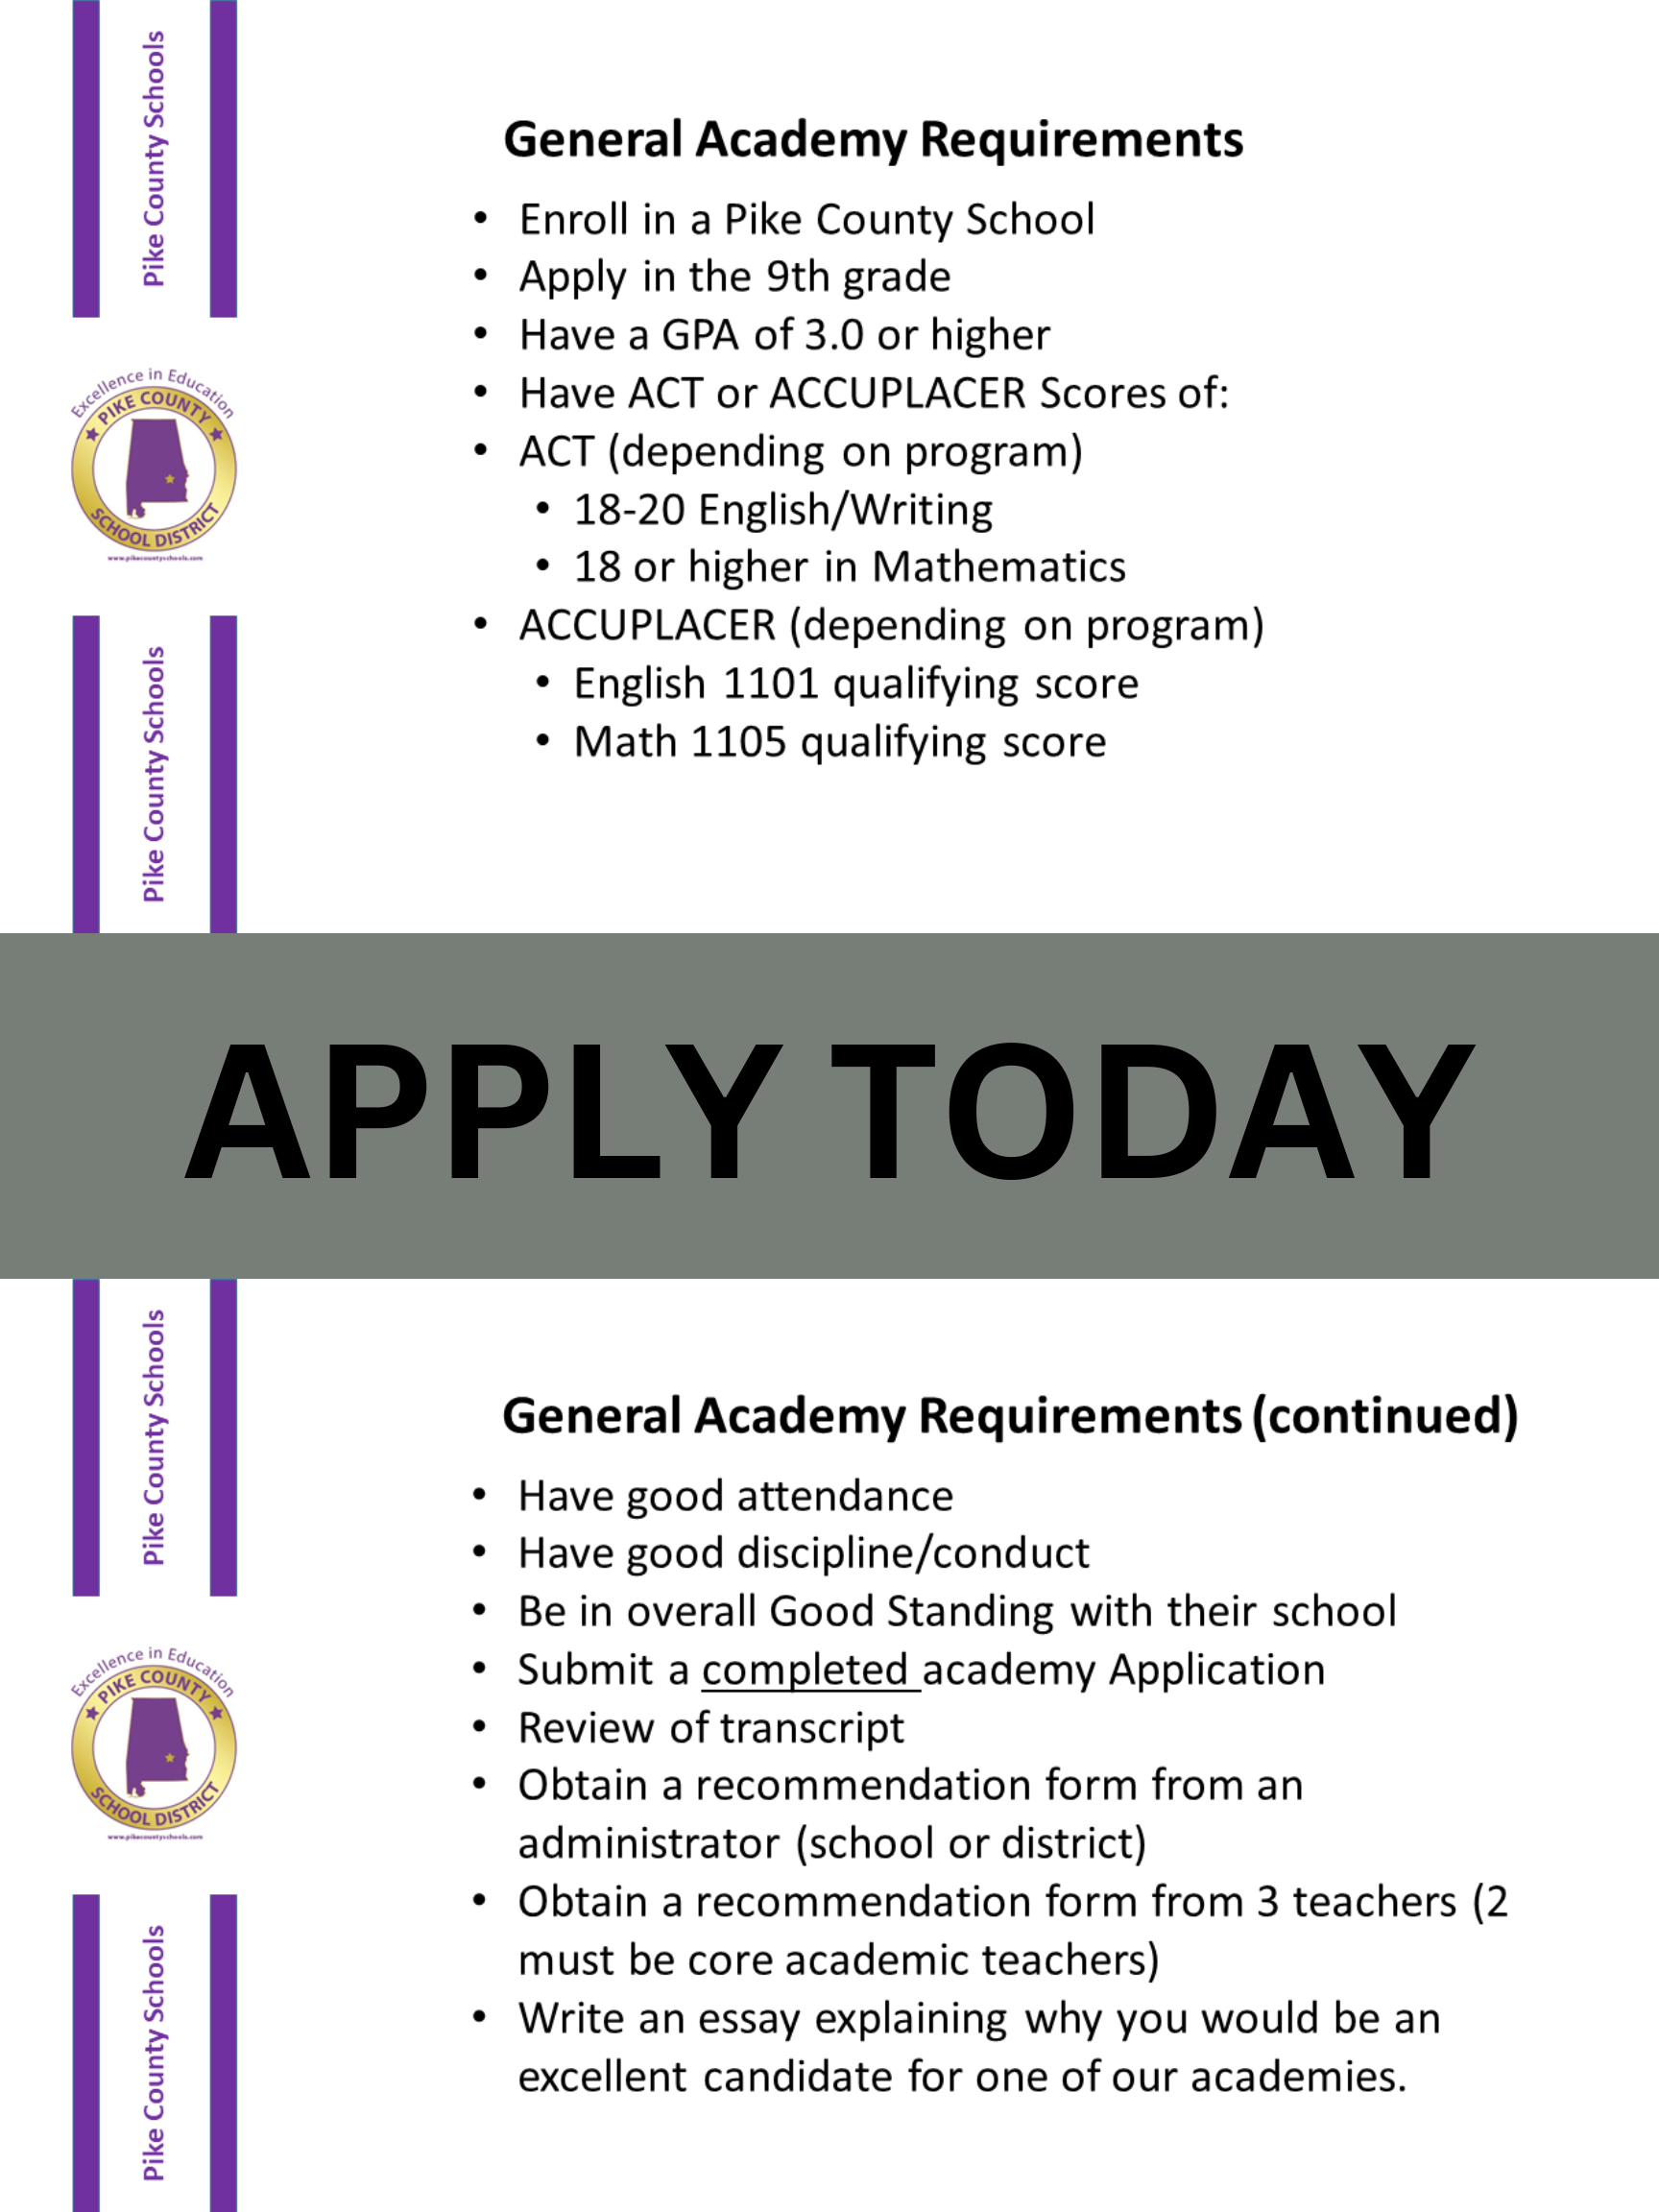 Academy Application information